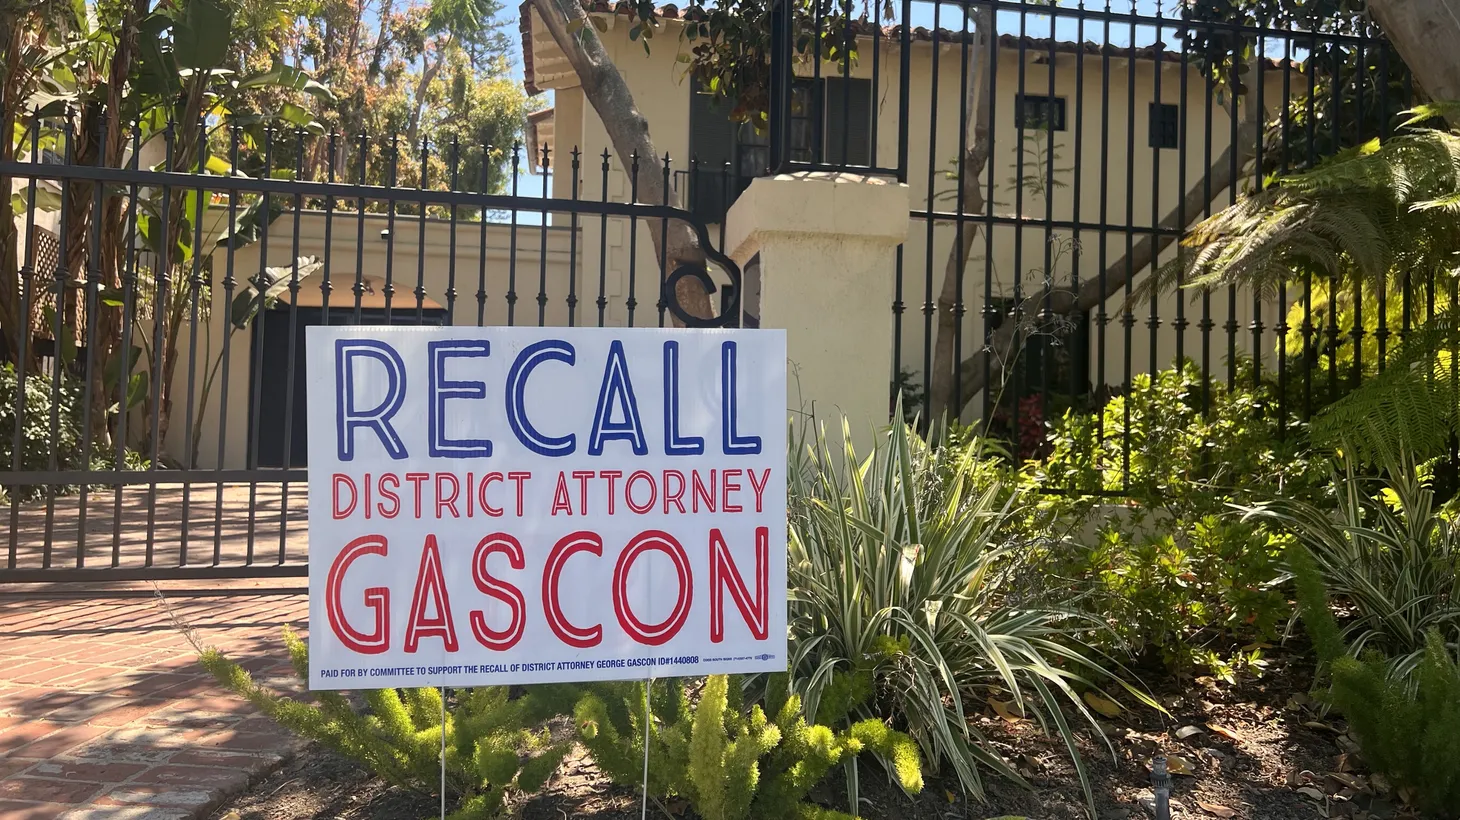 A “recall District Attorney Gascon” sign is displayed in Beverly Hills, June 28, 2022.